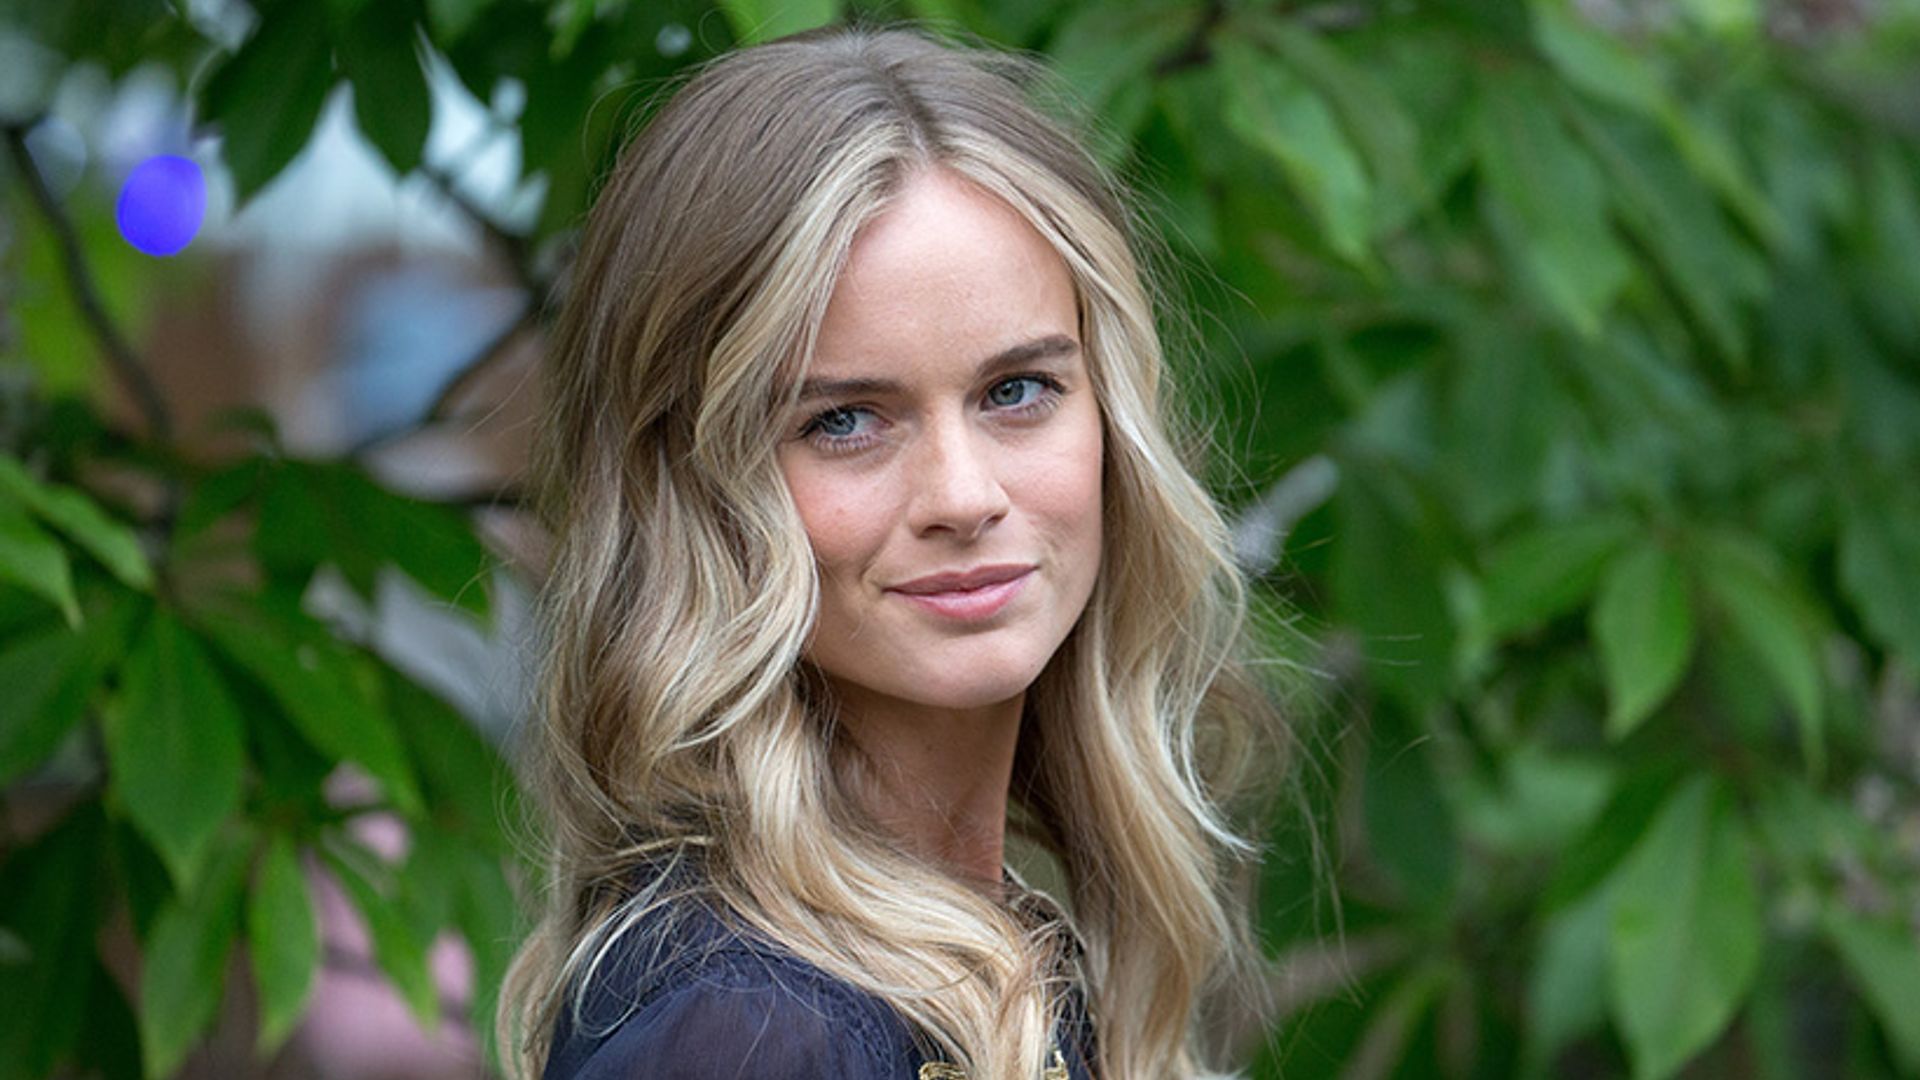 Cressida Bonas: It's 'incredibly frustrating' to be known as Prince Harry's ex